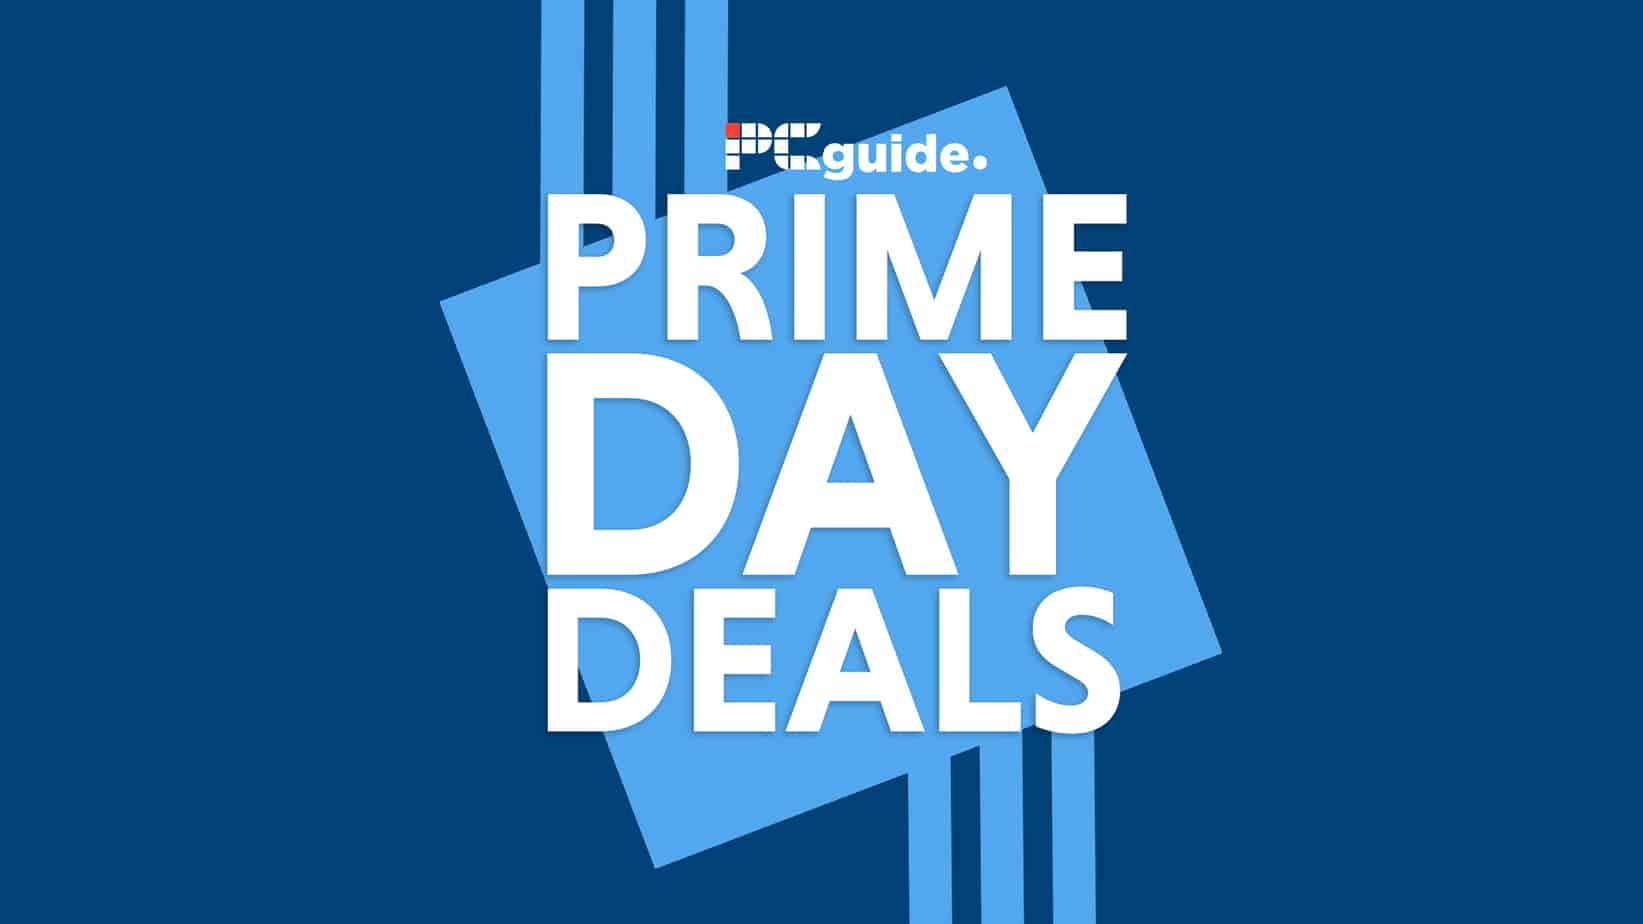 Best Amazon Prime Day 2020 Deals Monitors, Home Security, PC, and